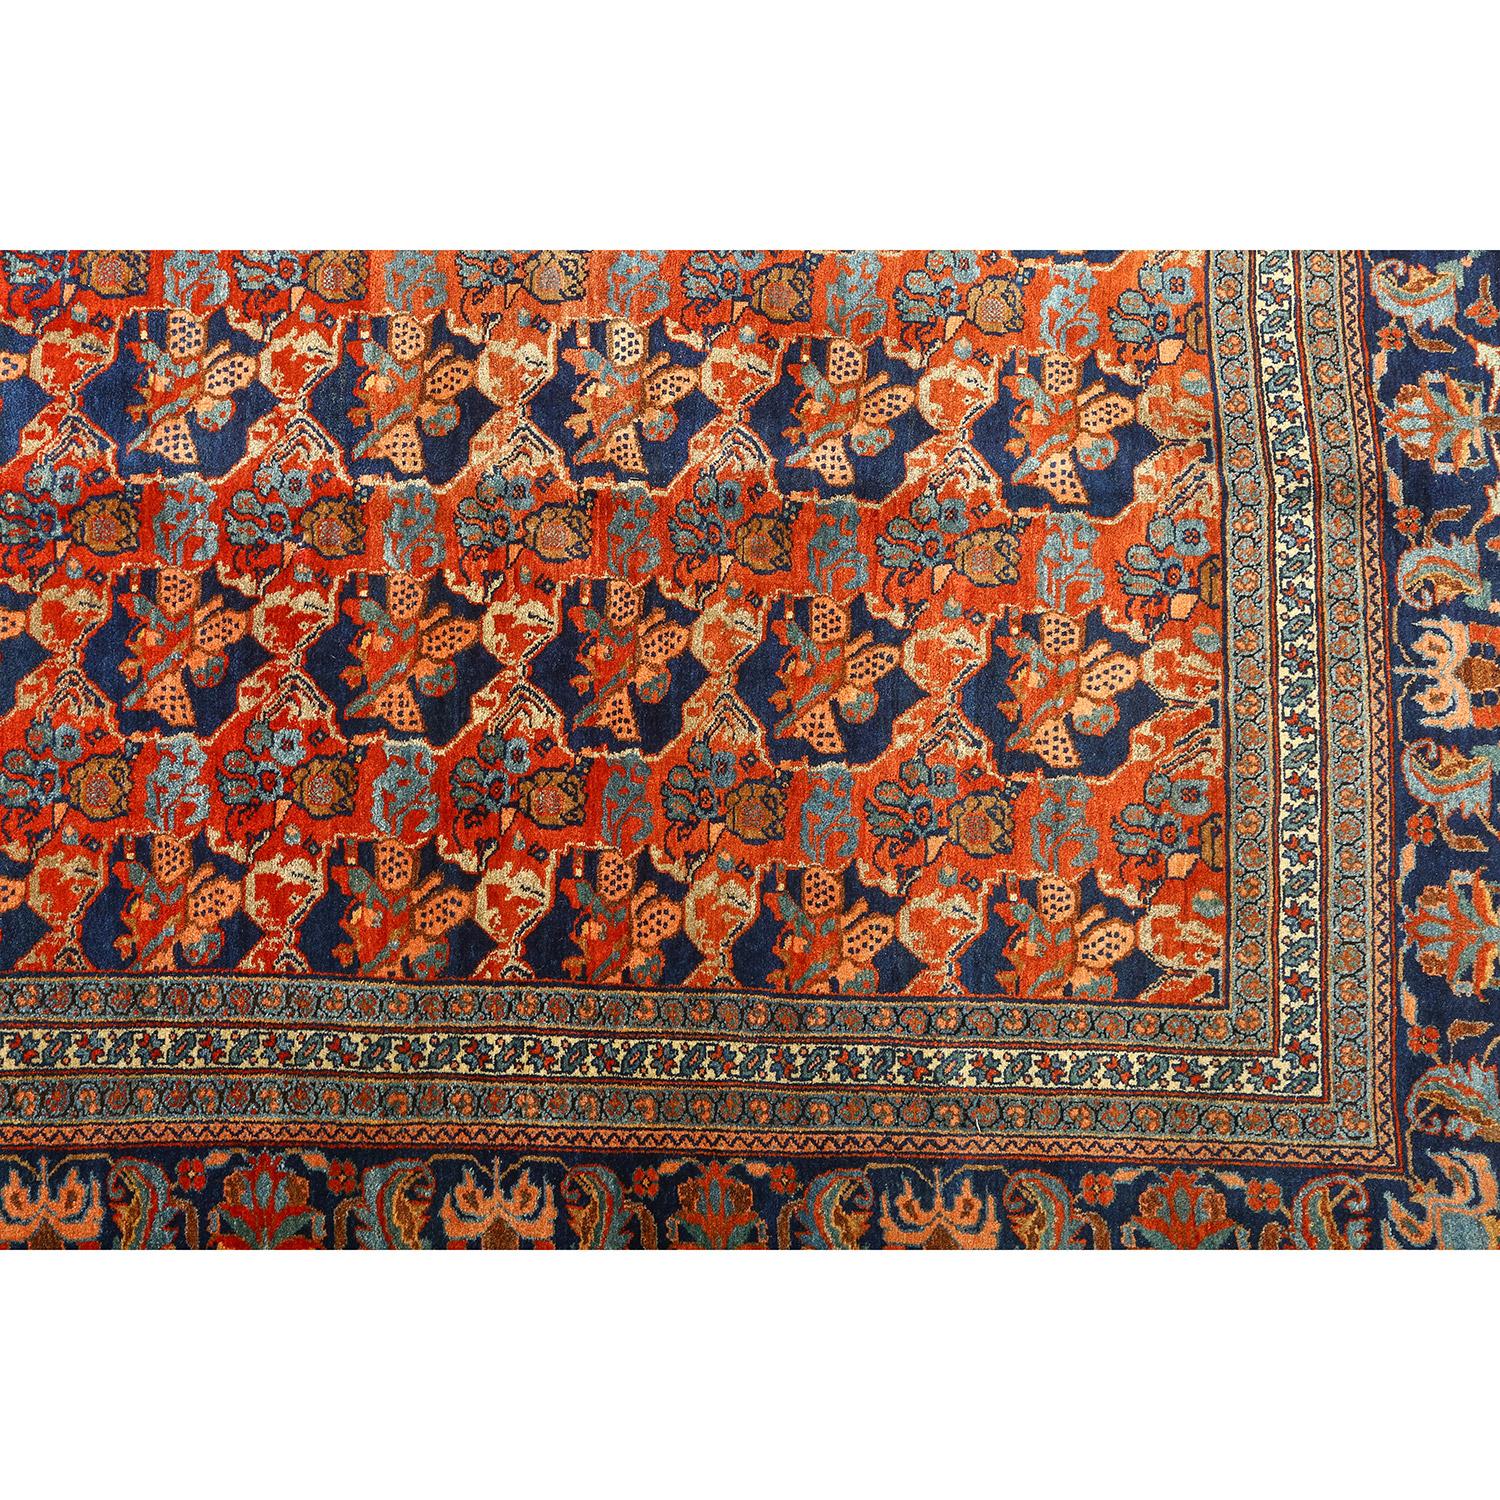 This Antique Bidjar Rug, measuring a generous 12 feet by 8 feet, is a true testament to the enduring allure of Persian craftsmanship. With its captivating All-Over Design, it has stood the test of time and embodies timeless beauty.

Meticulously